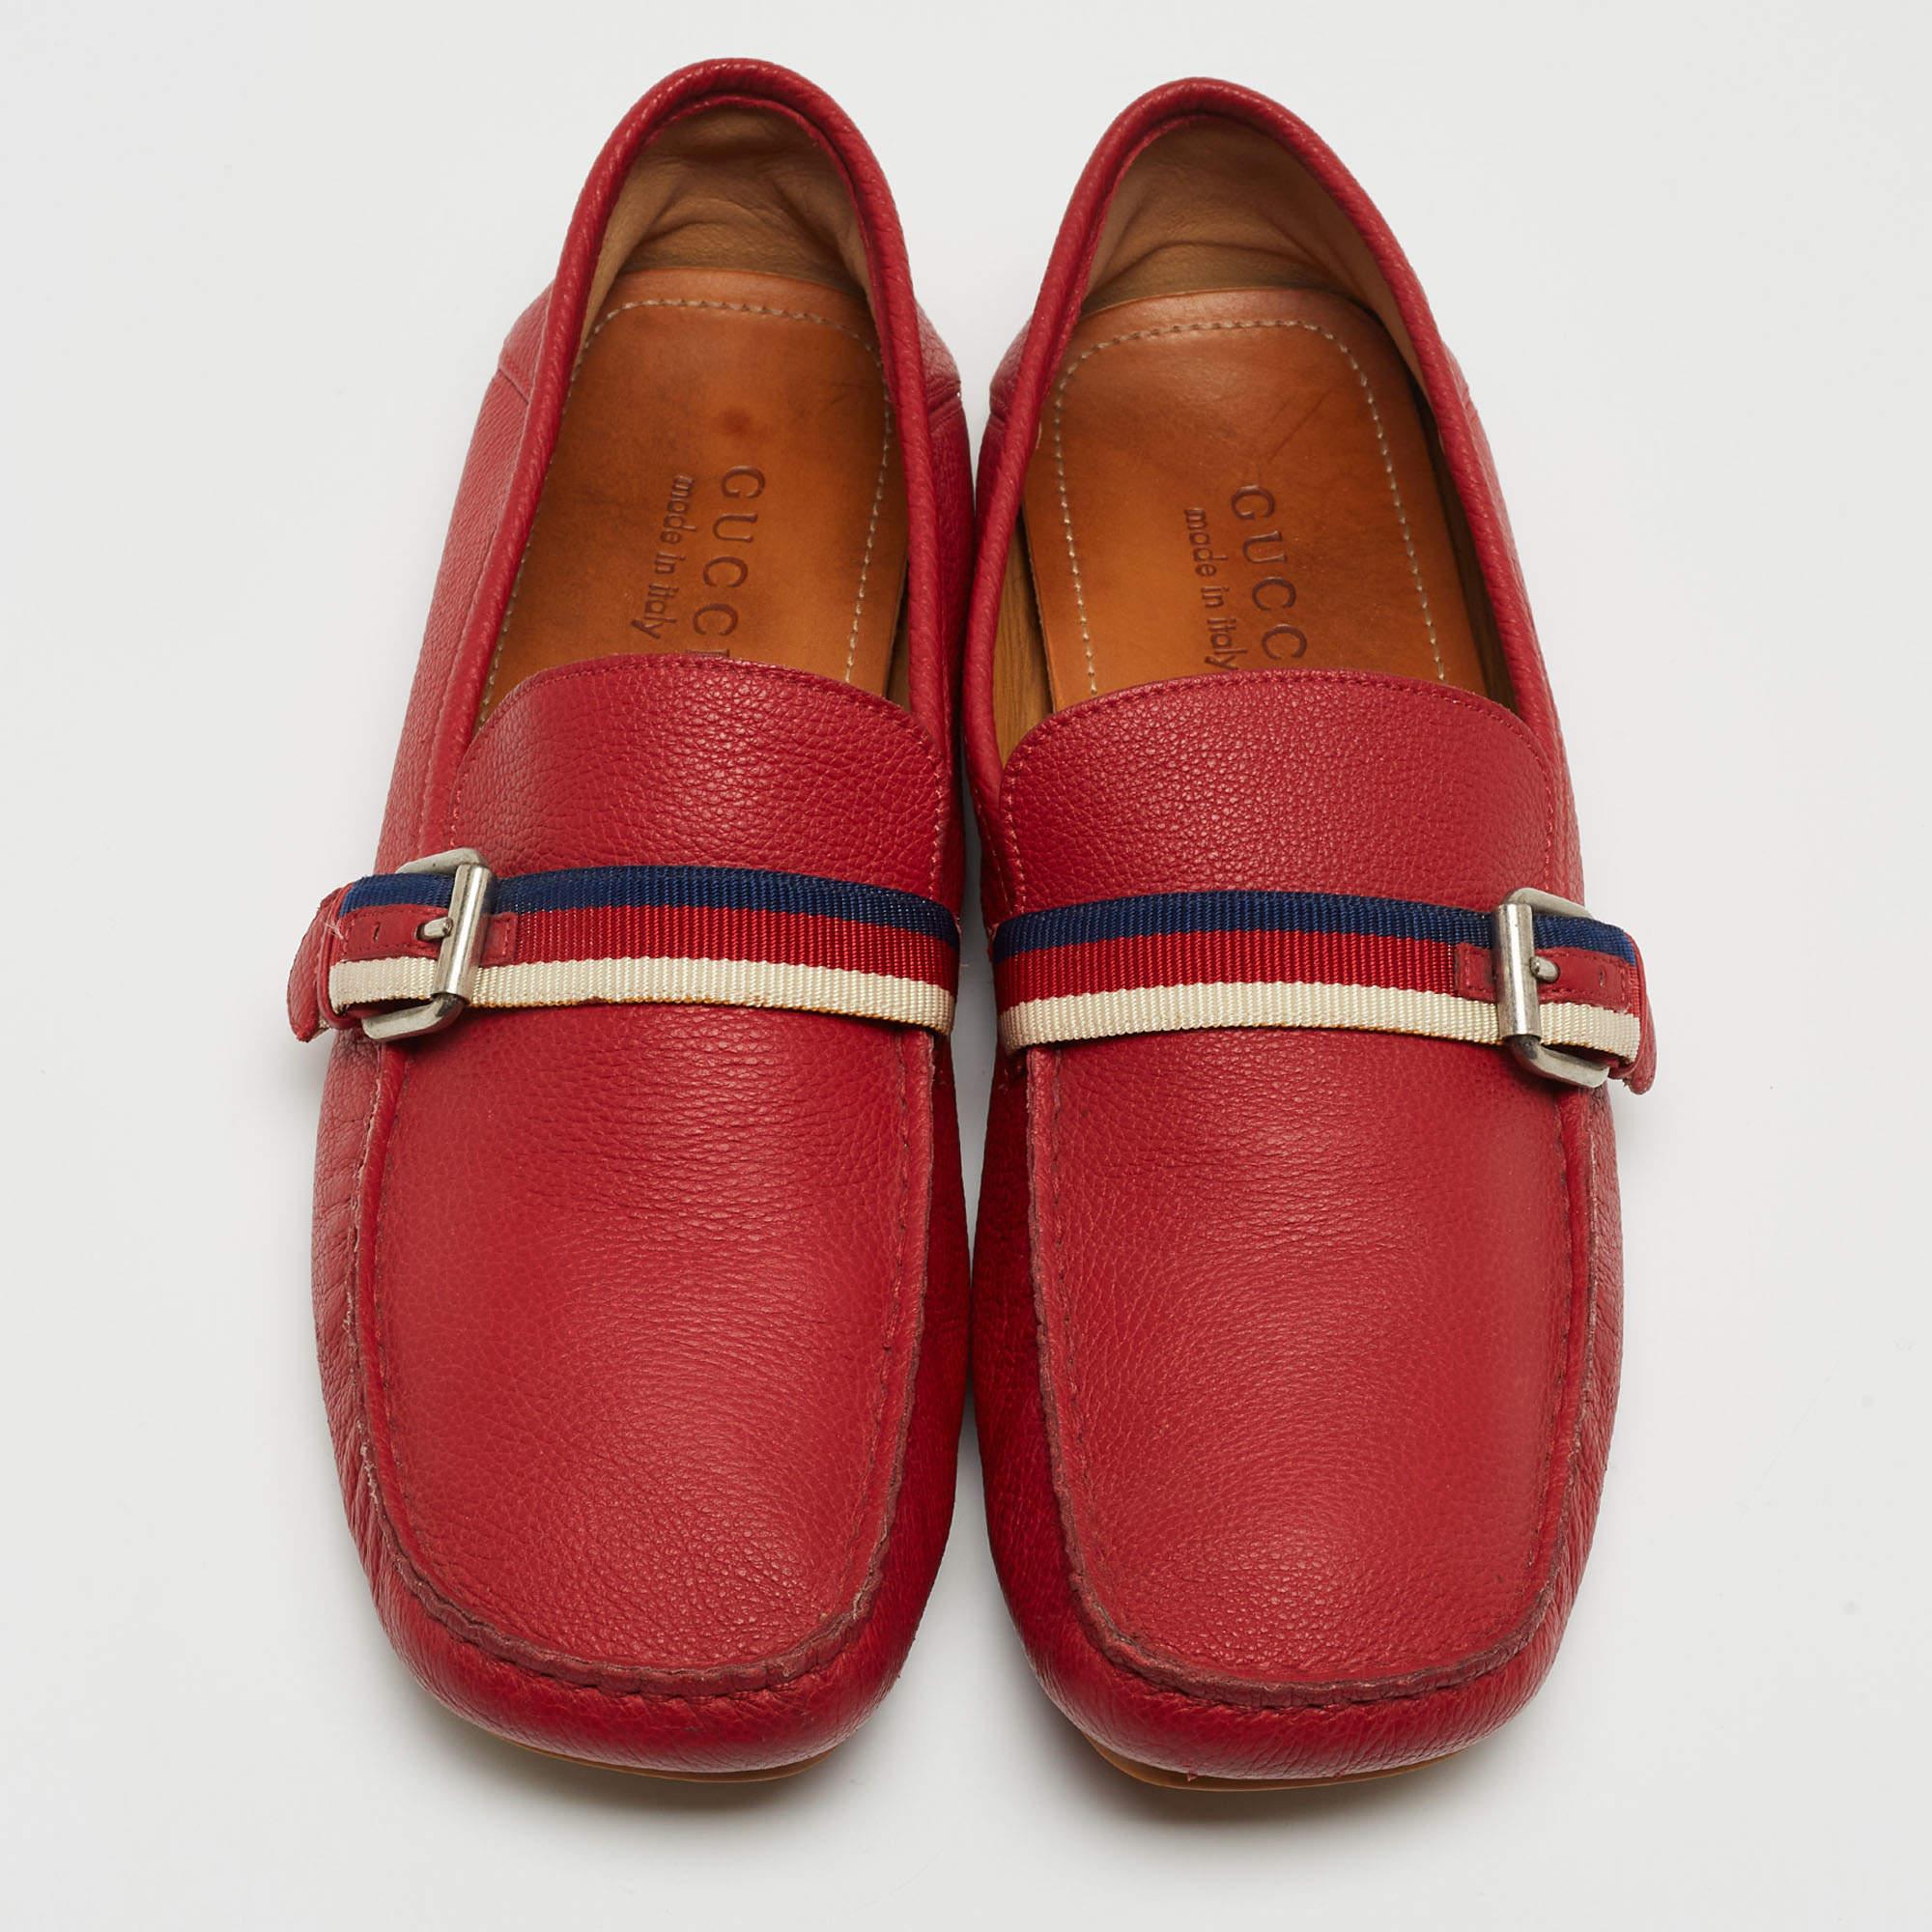 Gucci Red Leather Web Buckle Loafers Size 43 3